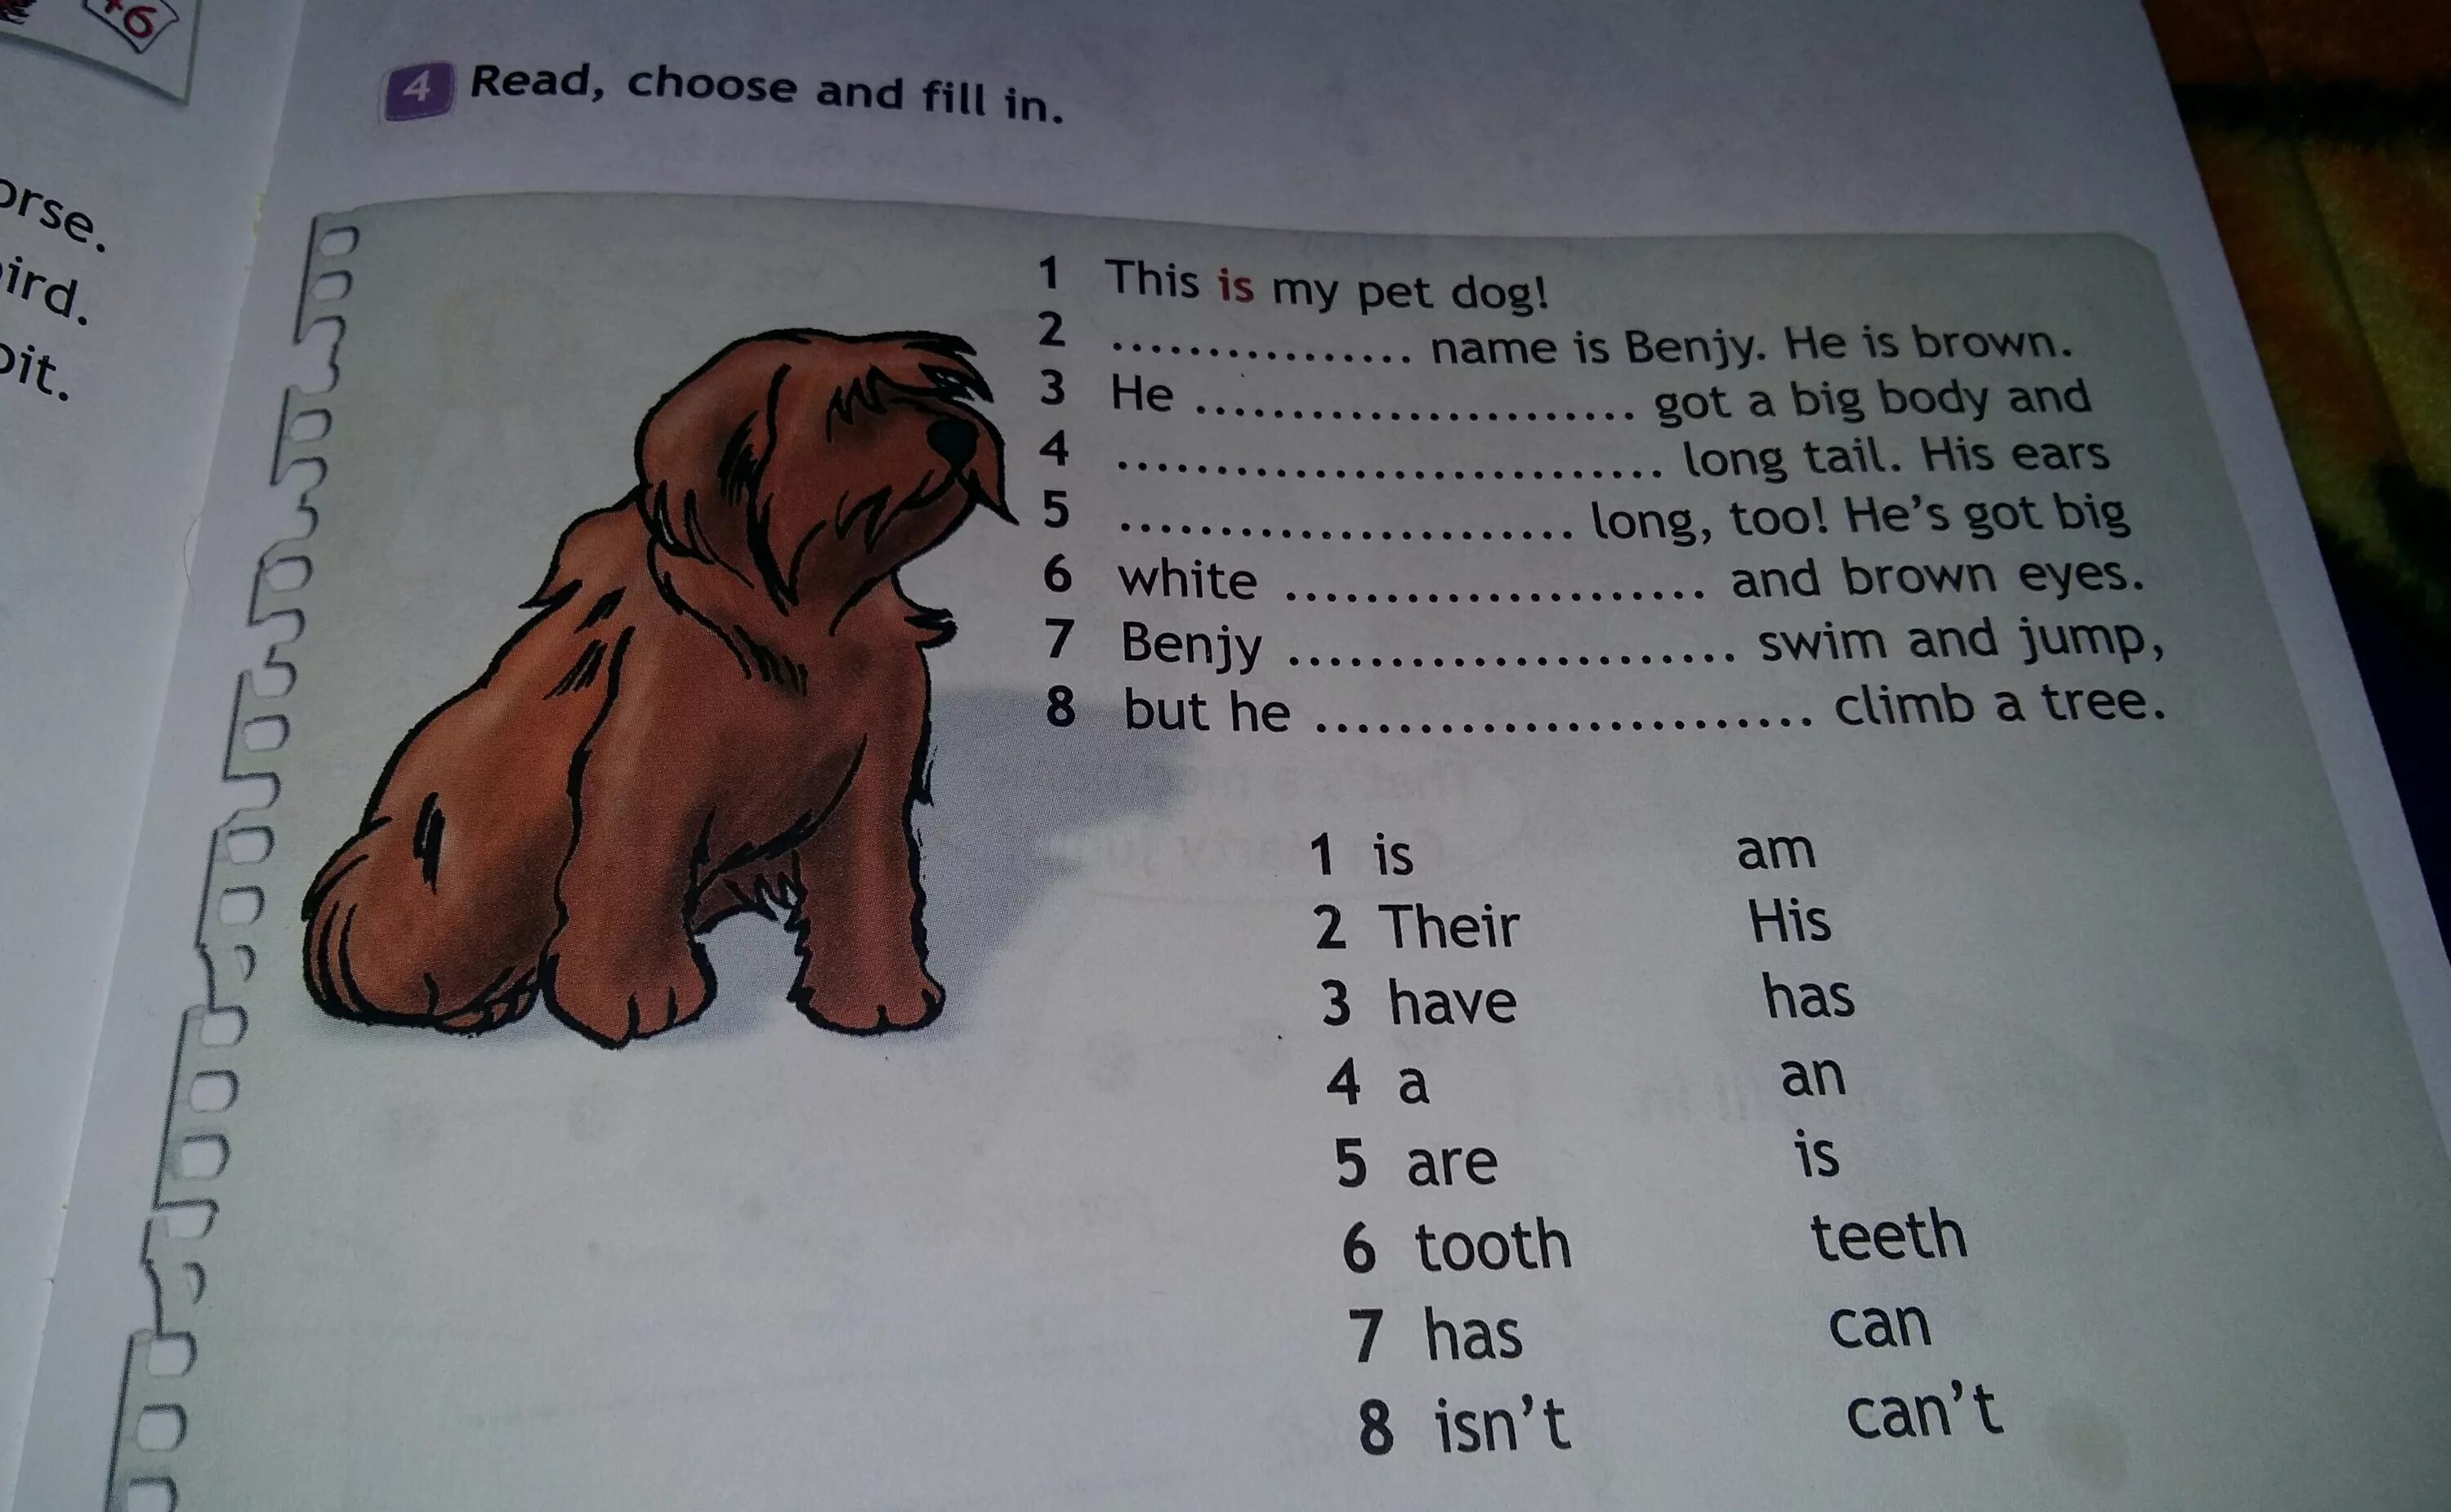 Read choose and fill in 3 класс. Look,read and fill in по английскому. Гдз по английскому read and fill in. Look read and choose. This is he dog